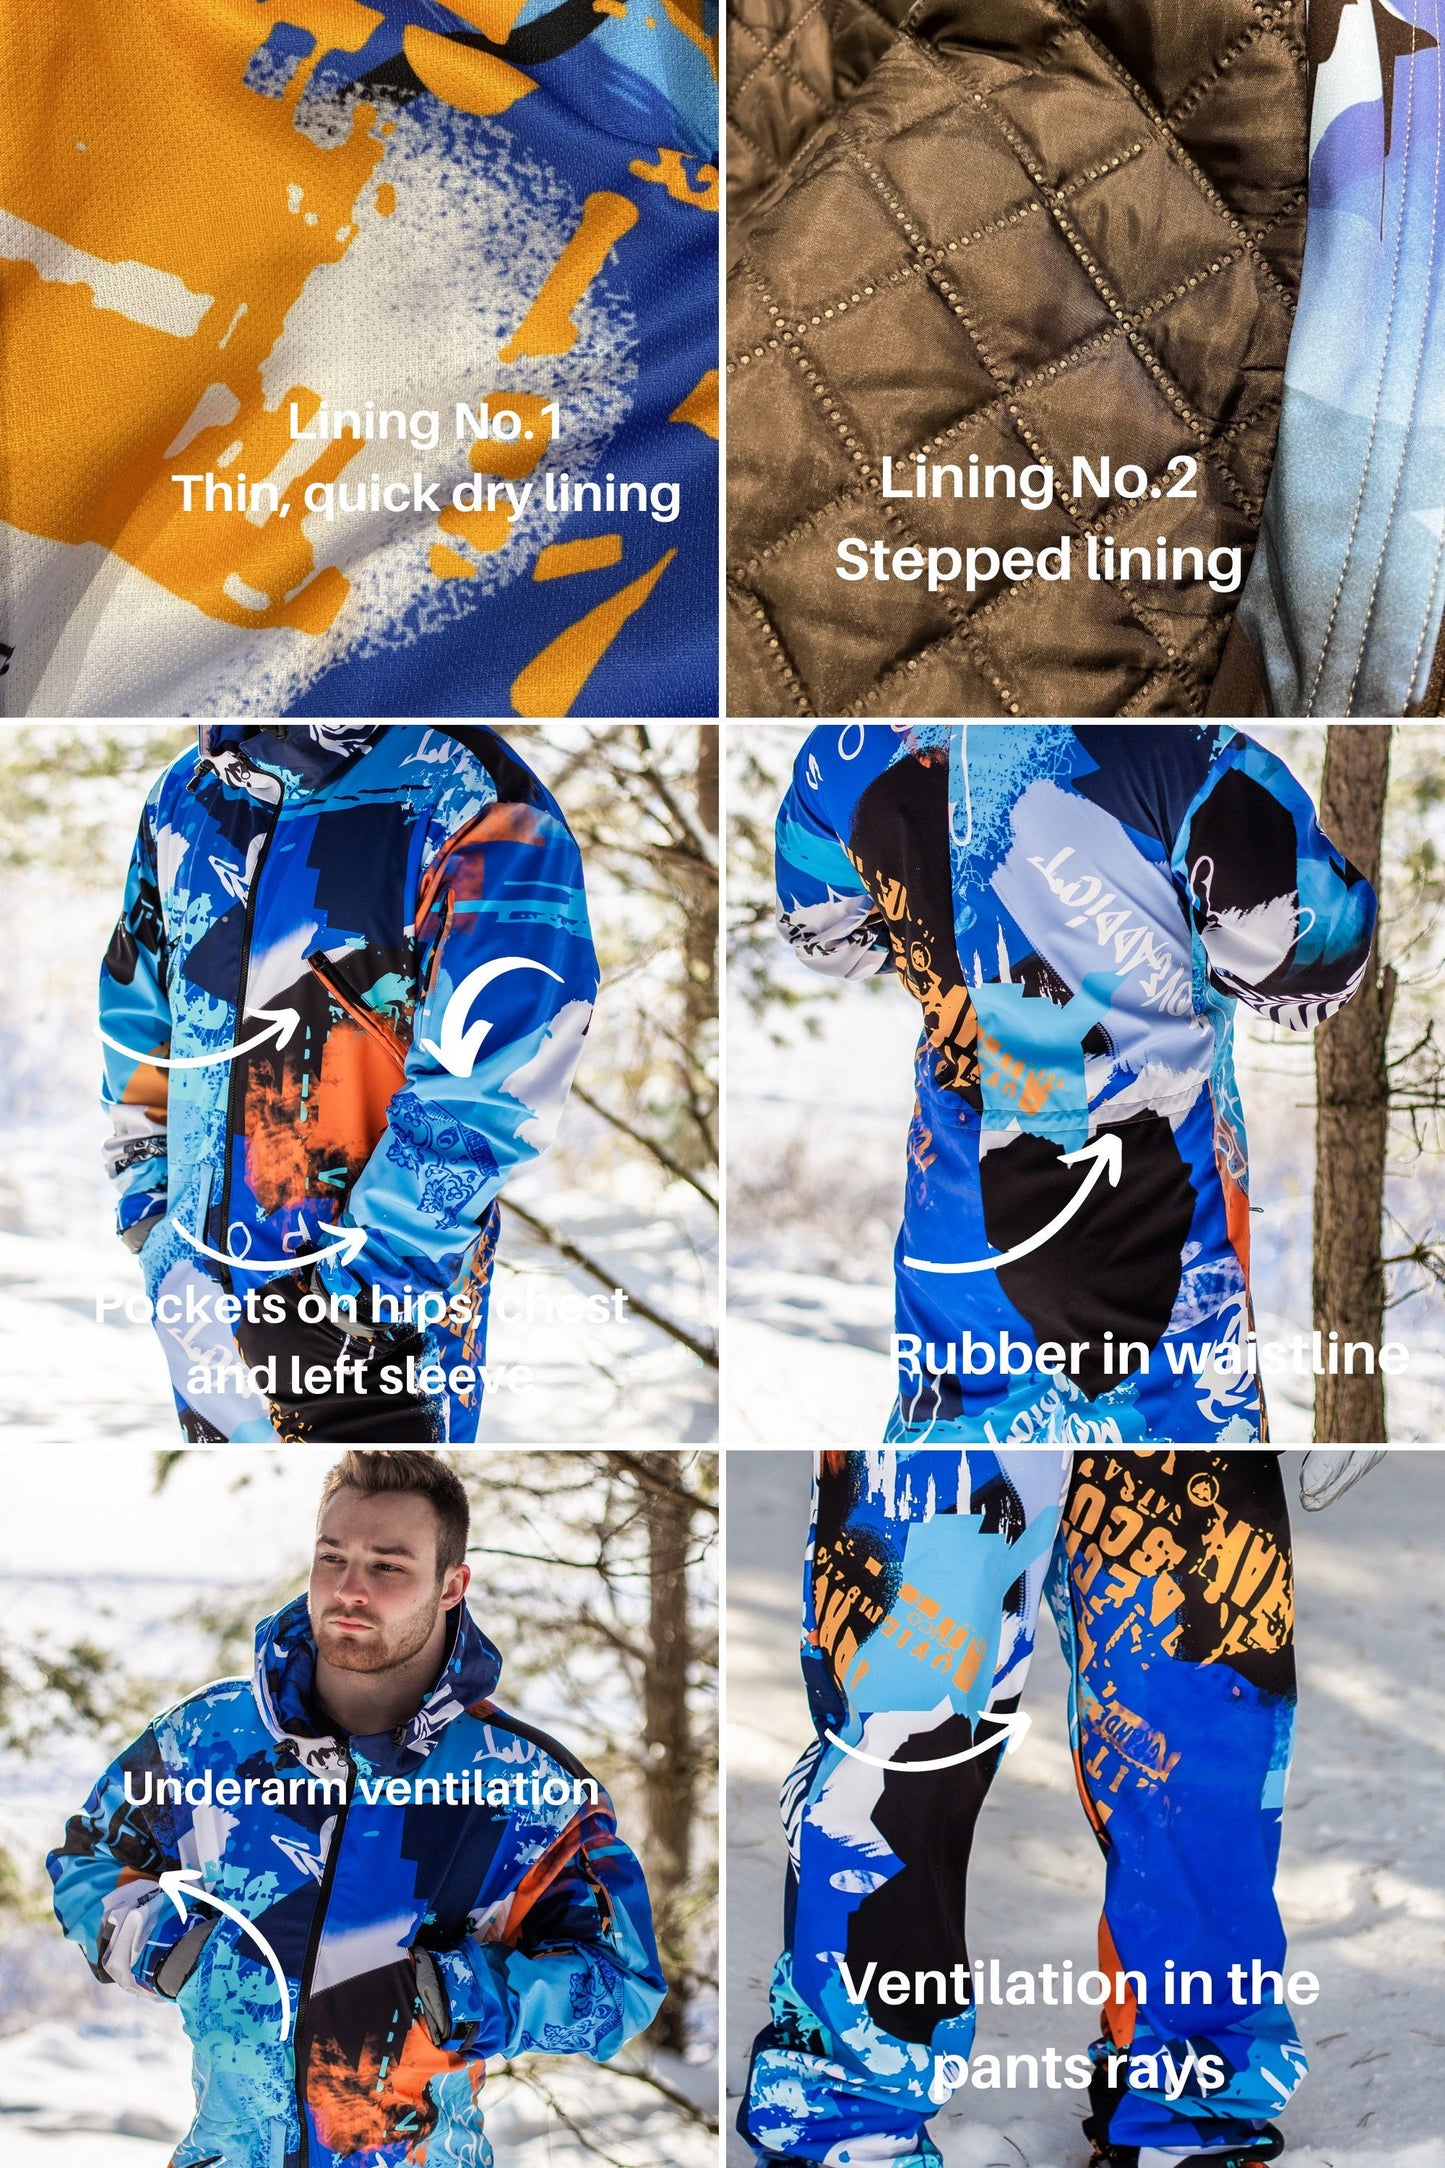 SET: Men's Blue Winter Ski Jumpsuit, Snowboard Clothes, Snowboard suit, Skiing Overall, Men's Mountain's clothes, Winter Thermal underwear